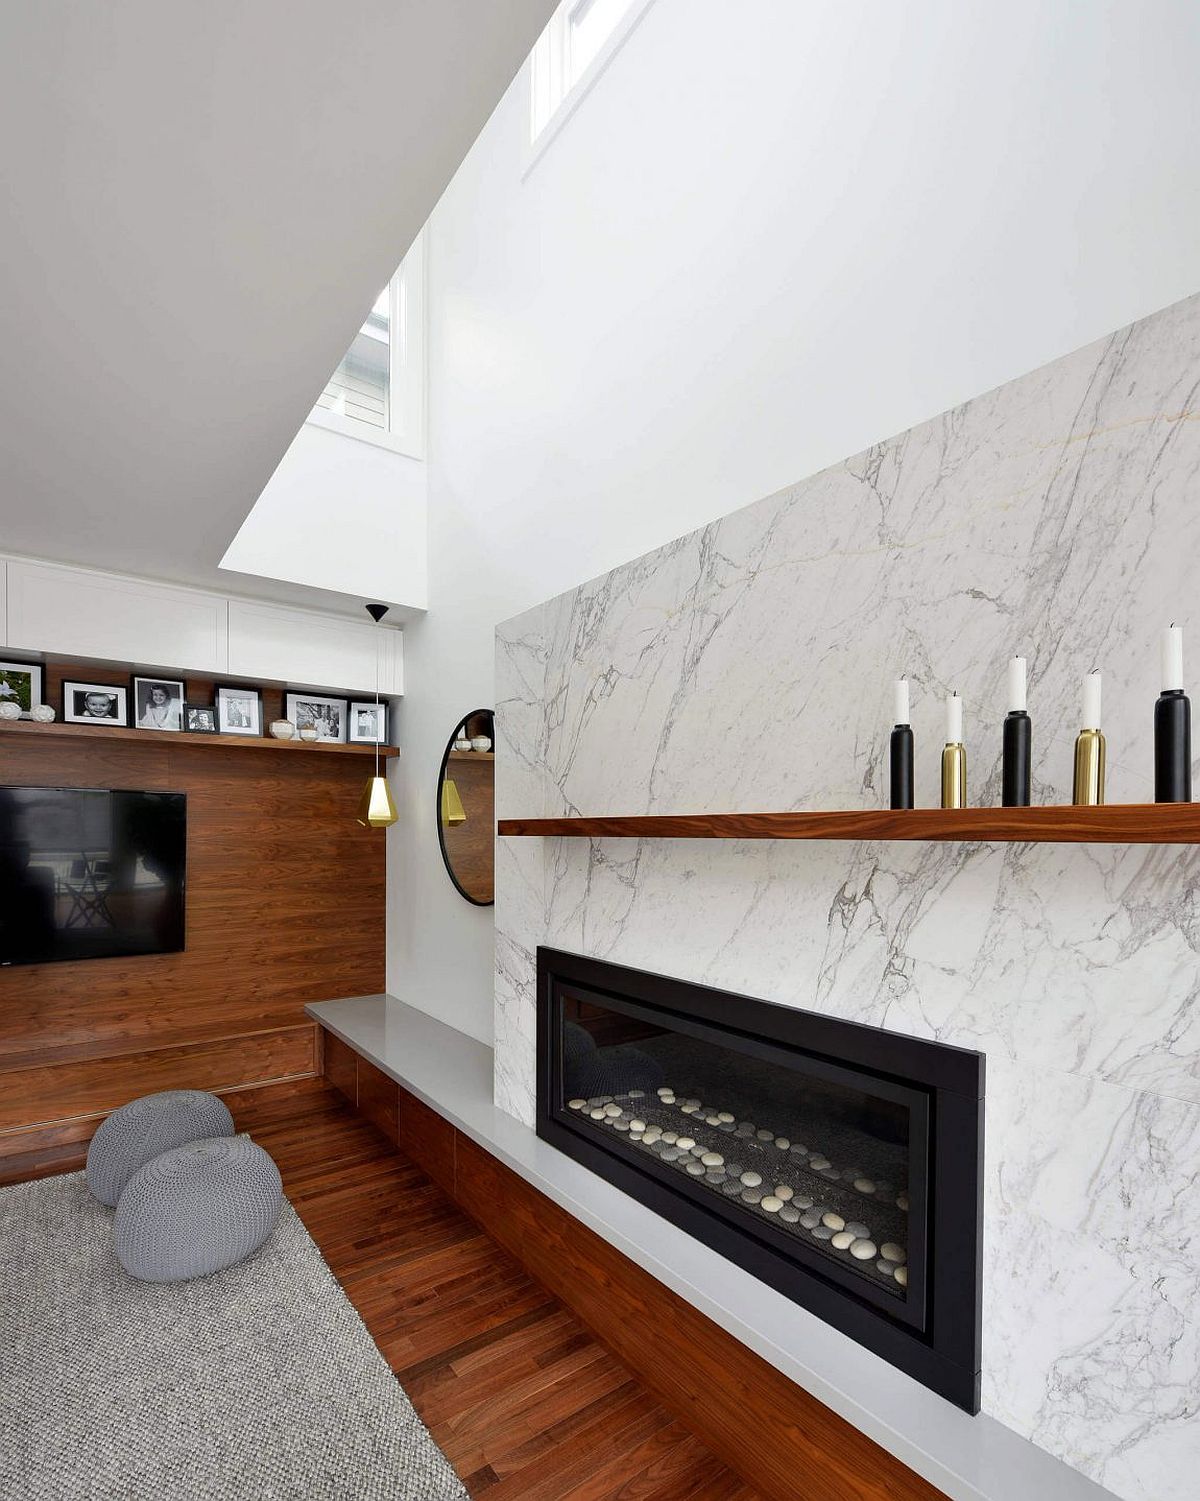 Marble around the fireplace along with the wooden TV wall bring in textural contrast